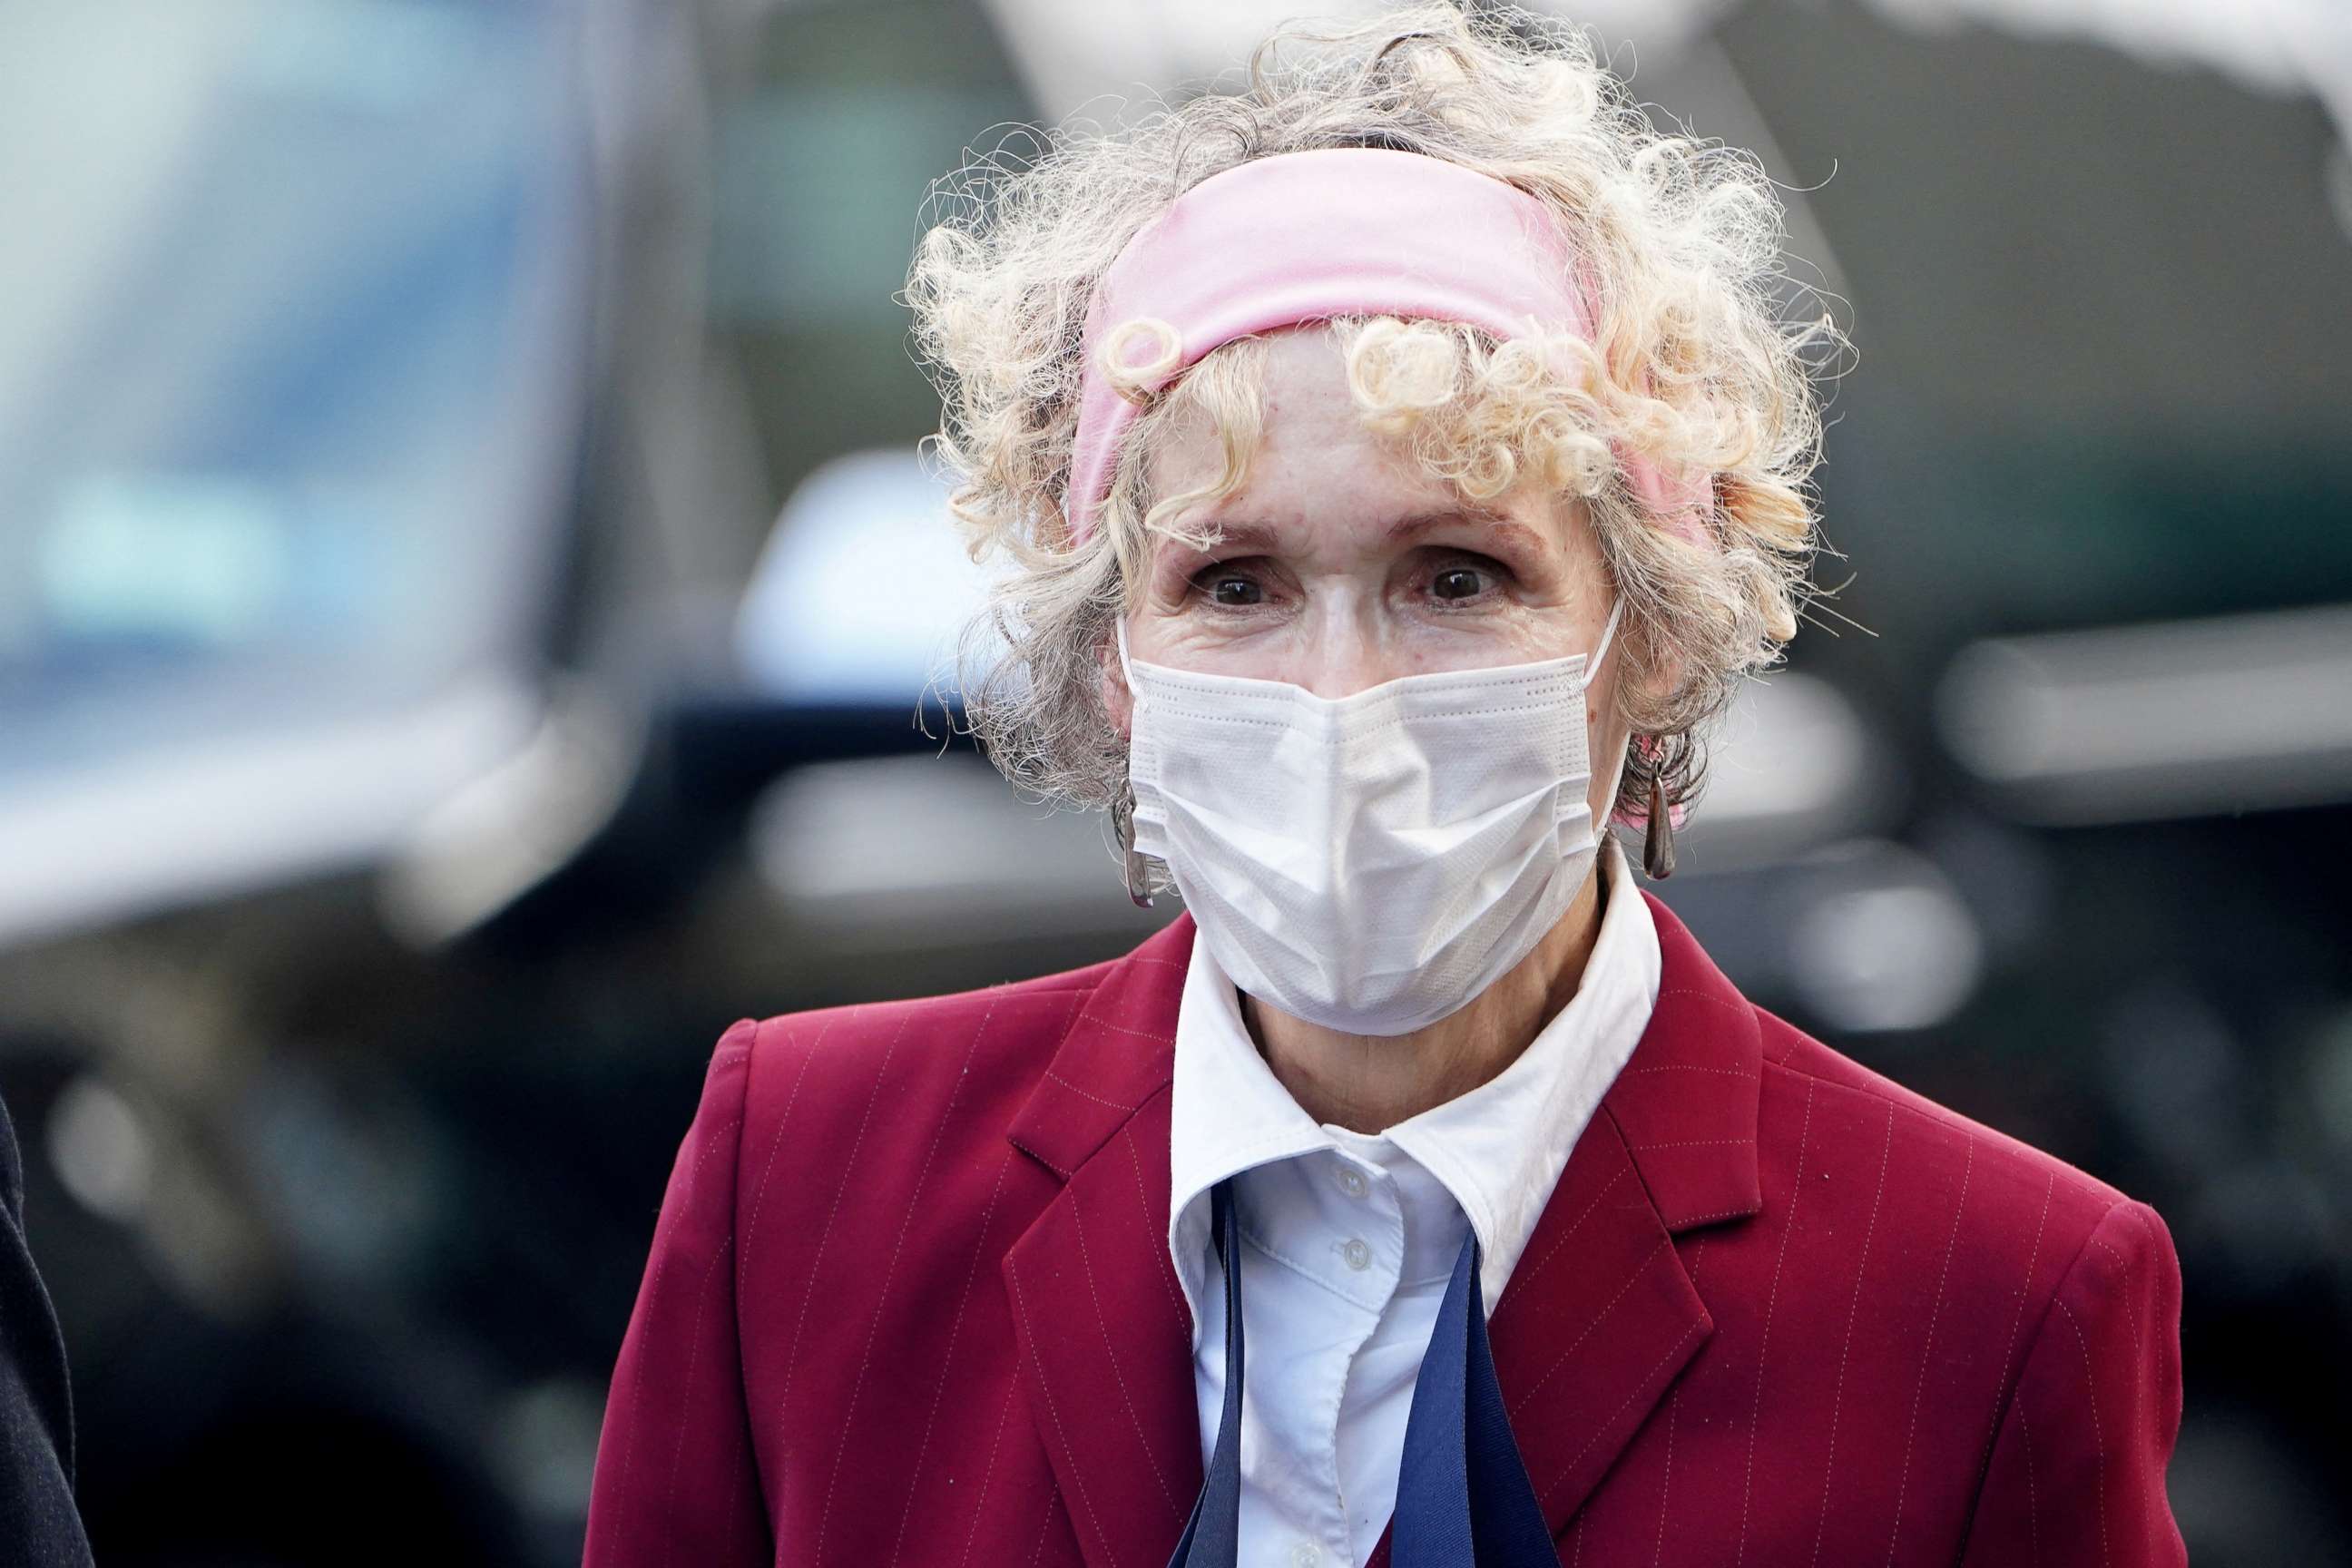 PHOTO: Donald Trump rape accuser E. Jean Carroll arrives for her hearing at federal court during the COVID-19 pandemic in the Manhattan borough of New York City, Oct. 21, 2020.